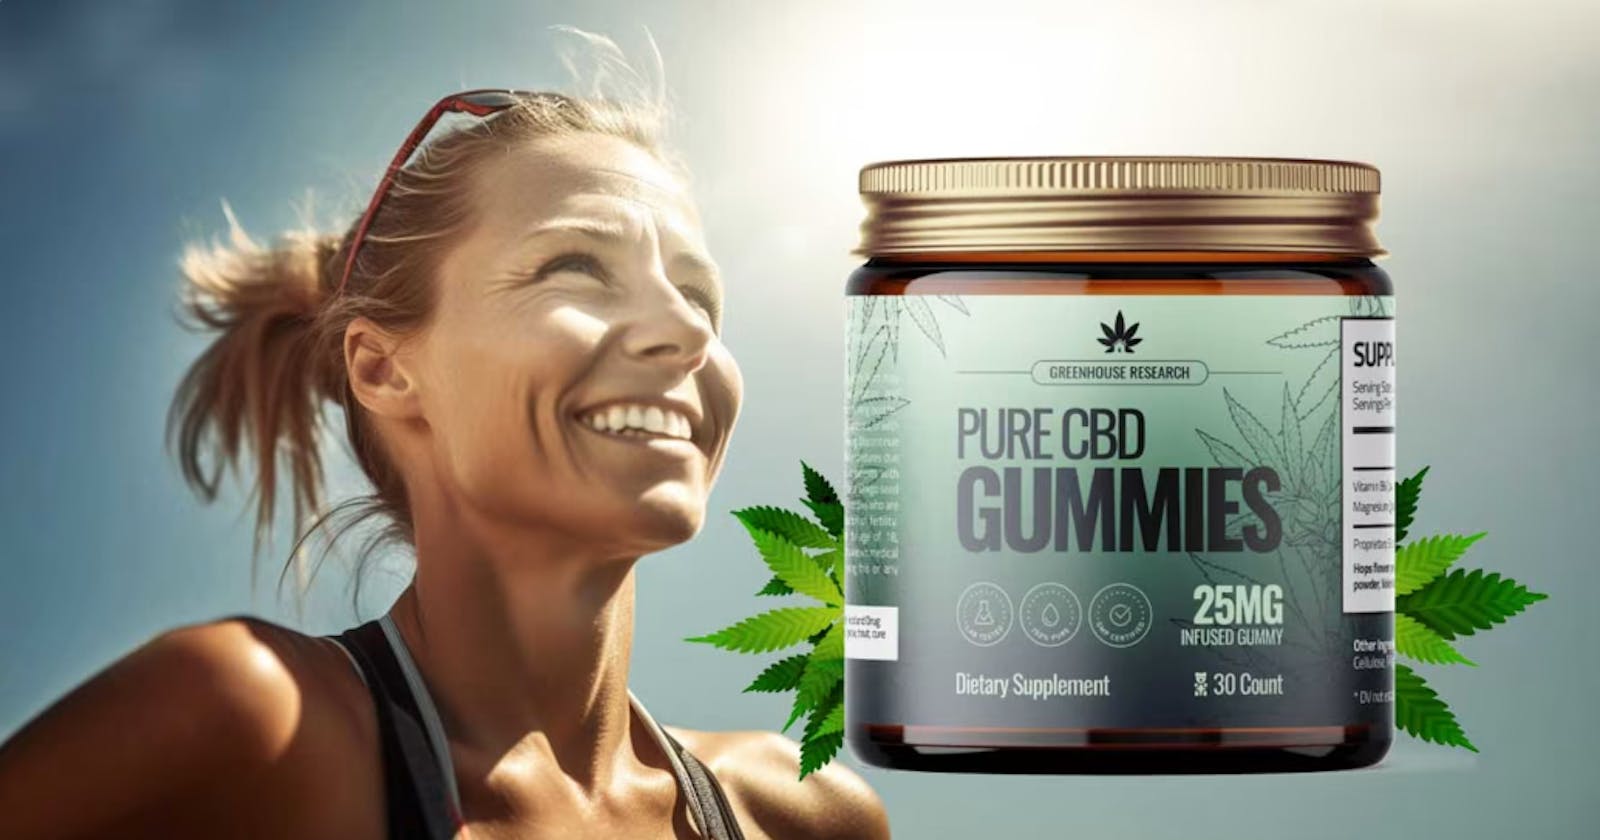 Miracle CBD Gummies Real Reviews Of Official Website?